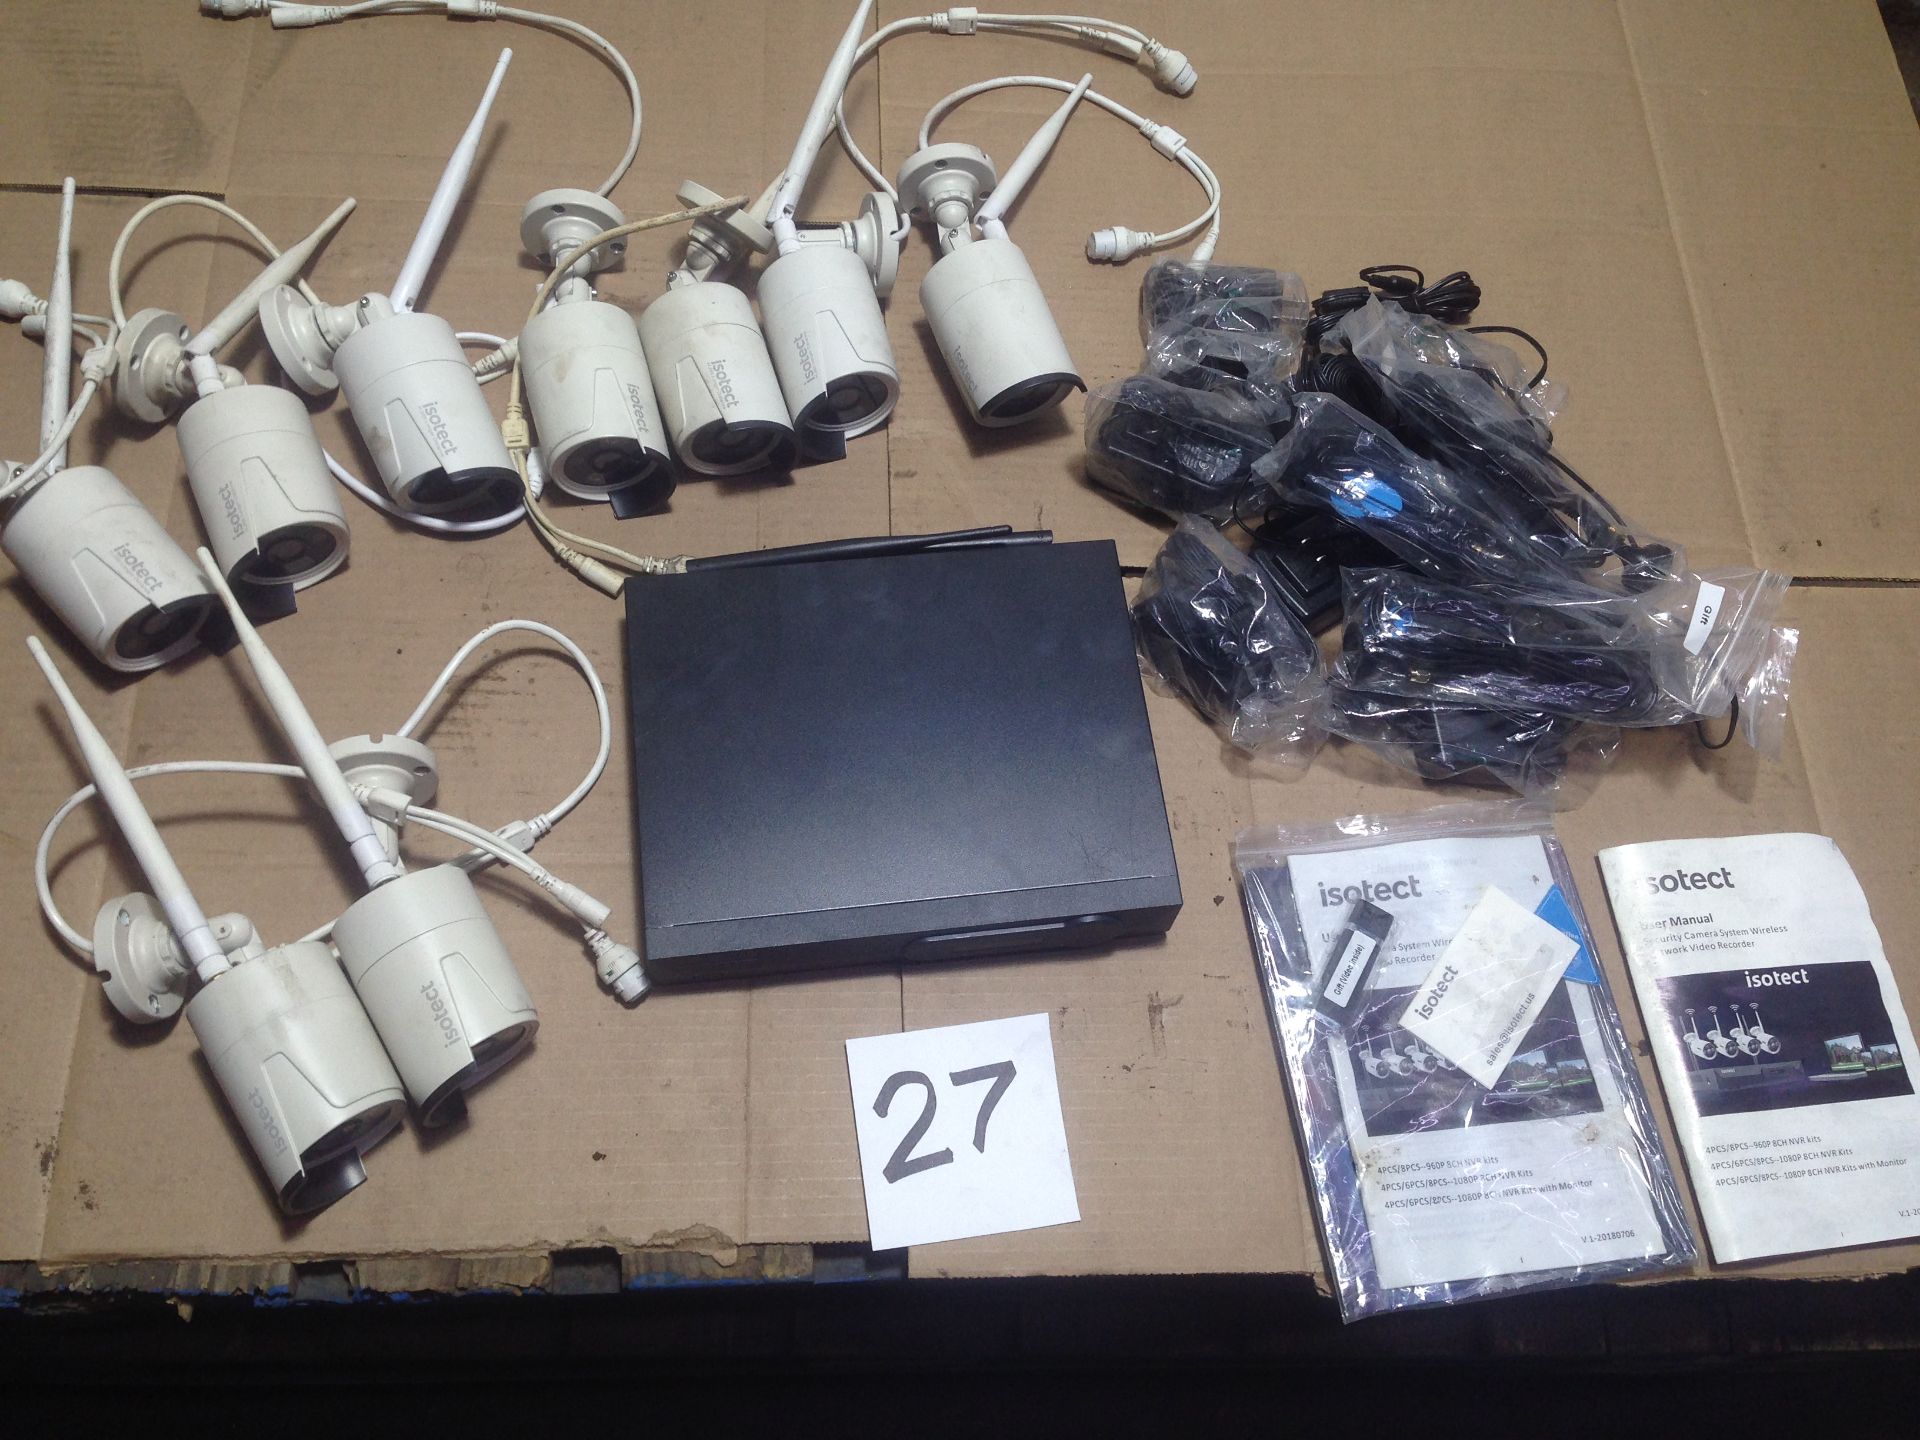 LOT - ISOTECT 9-CAMERA SECURITY SYSTEM (NEW, OPEN BOX)